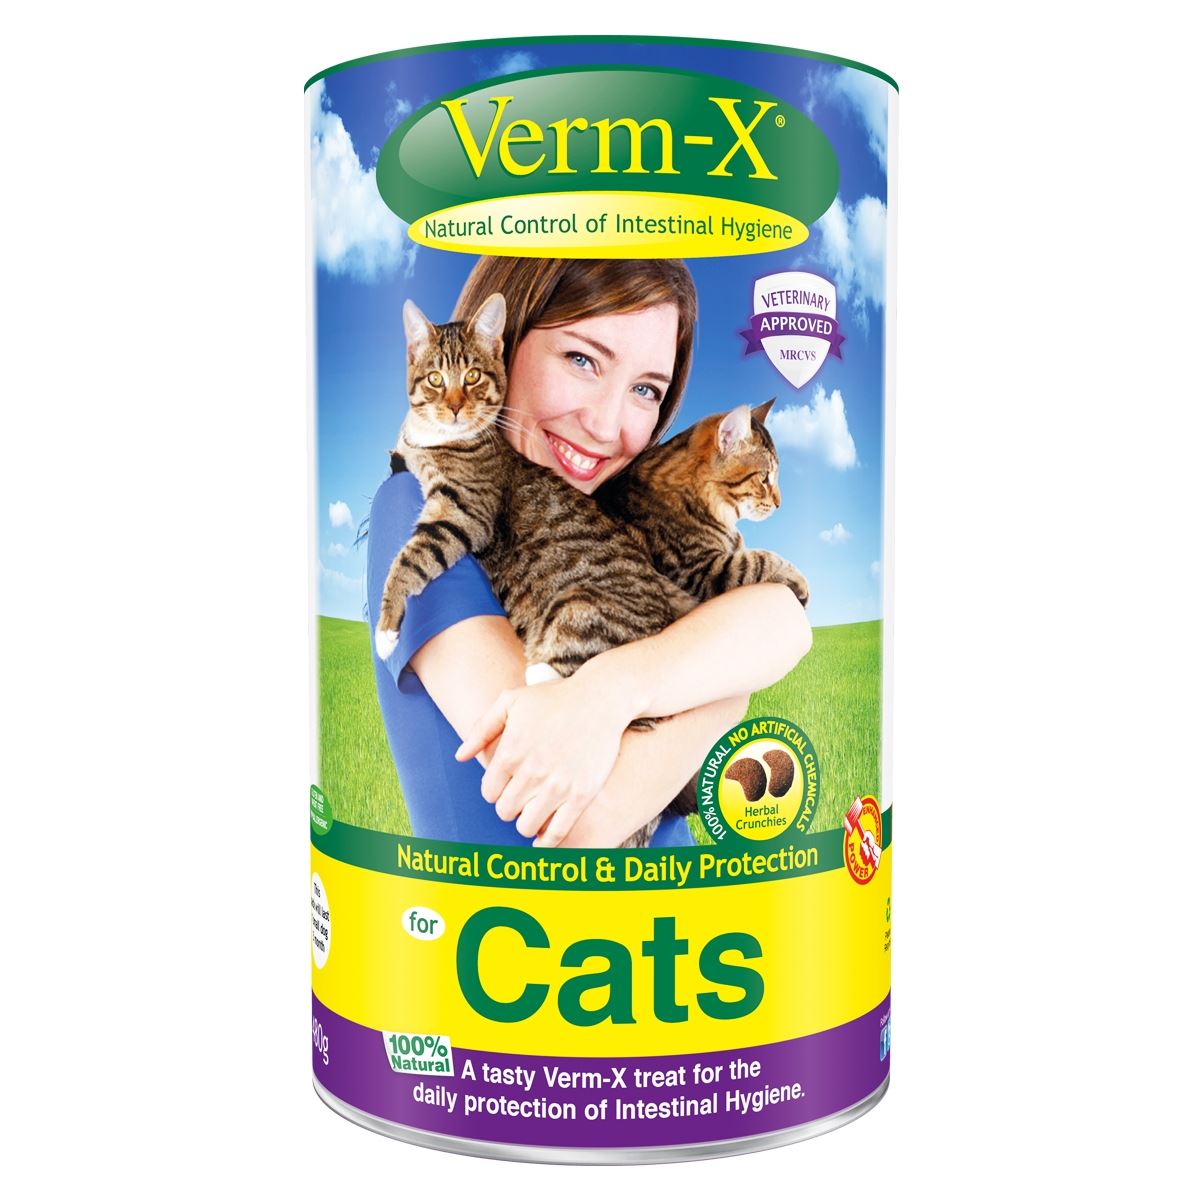 Verm-X Herbal Crunchies For Cats - Just Horse Riders